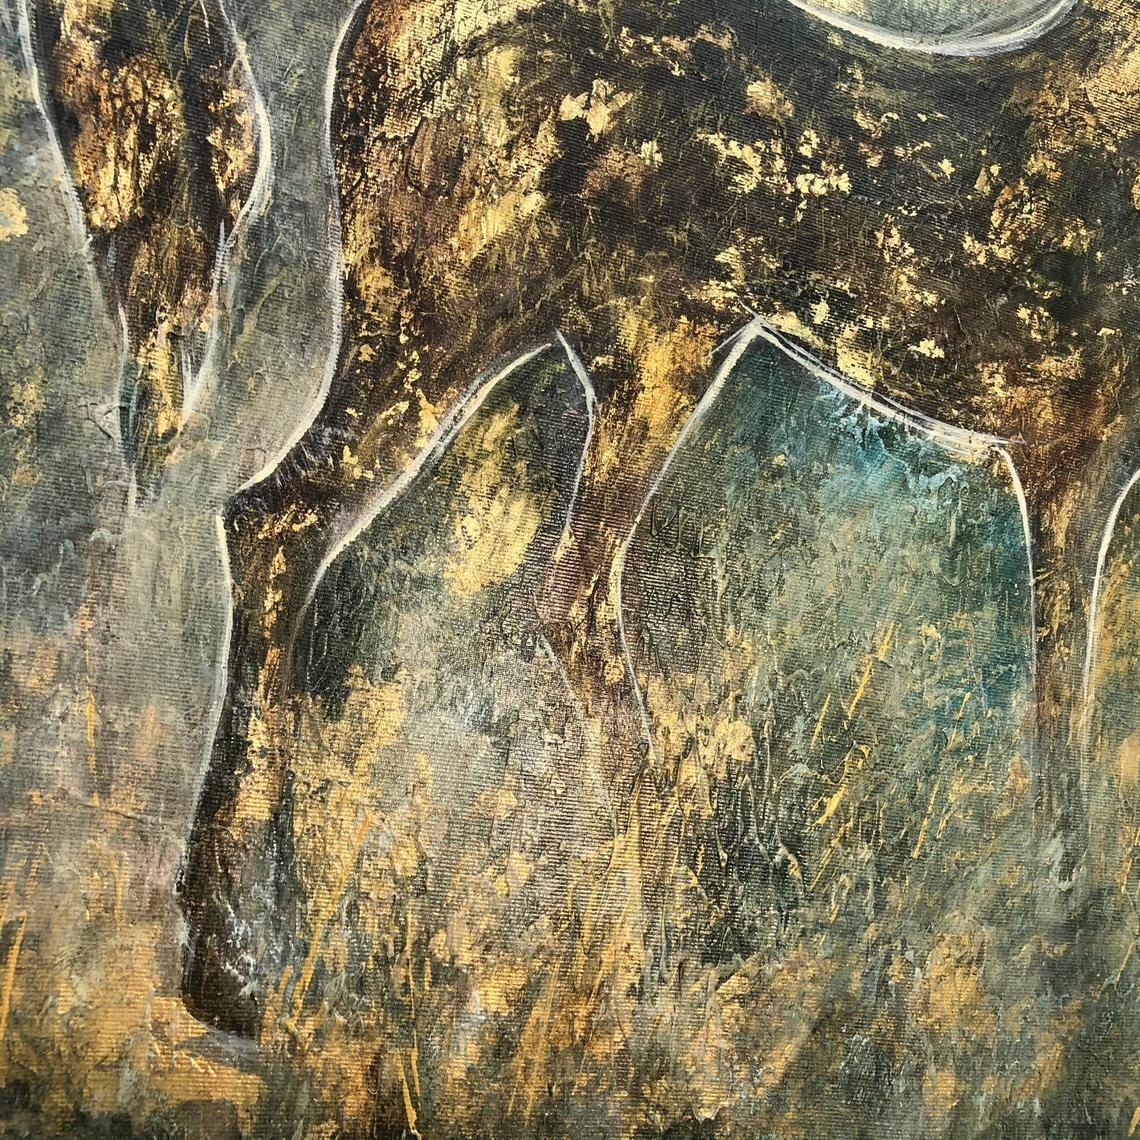 ABSTRACT HORSE from $304.57+